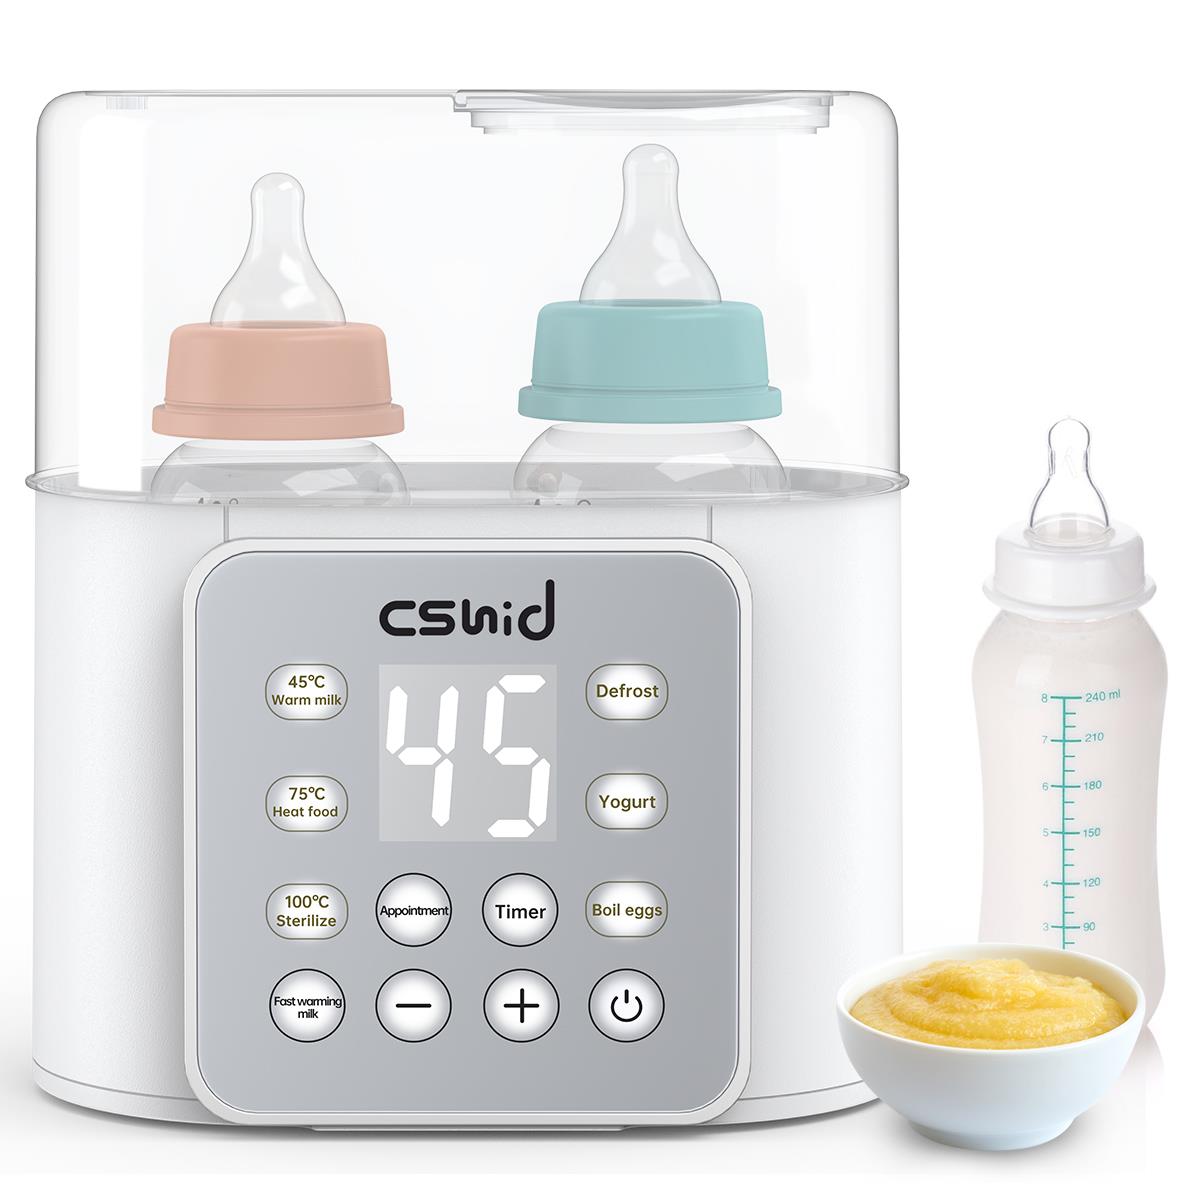 Baby Bottle Warmer, Bottle Sterilizer 9-in-1 Fast Food Heater and DefrostBottle FeedingGPED- combines the latest technologies with over a decade of hardware expertise to design and build solid, reliable consumer electronics photo